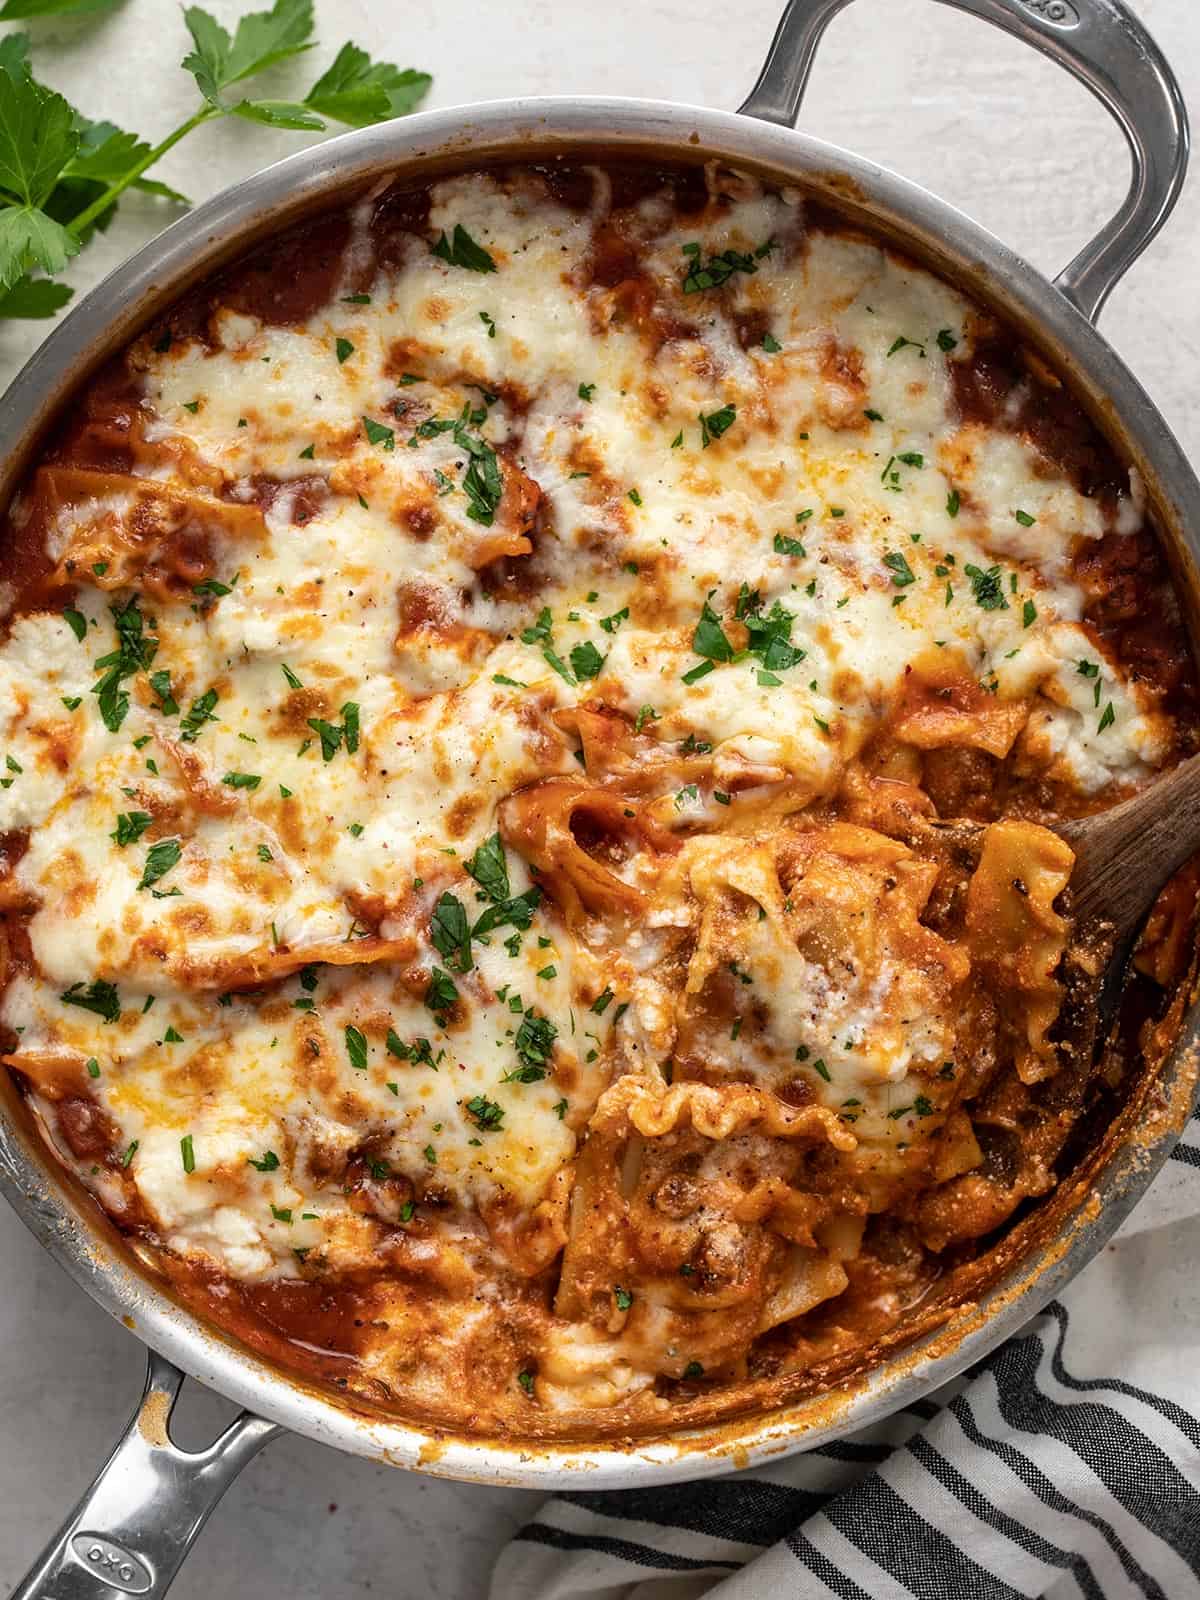 Overhead view of skillet lasagna with a spoon digging into the skillet.